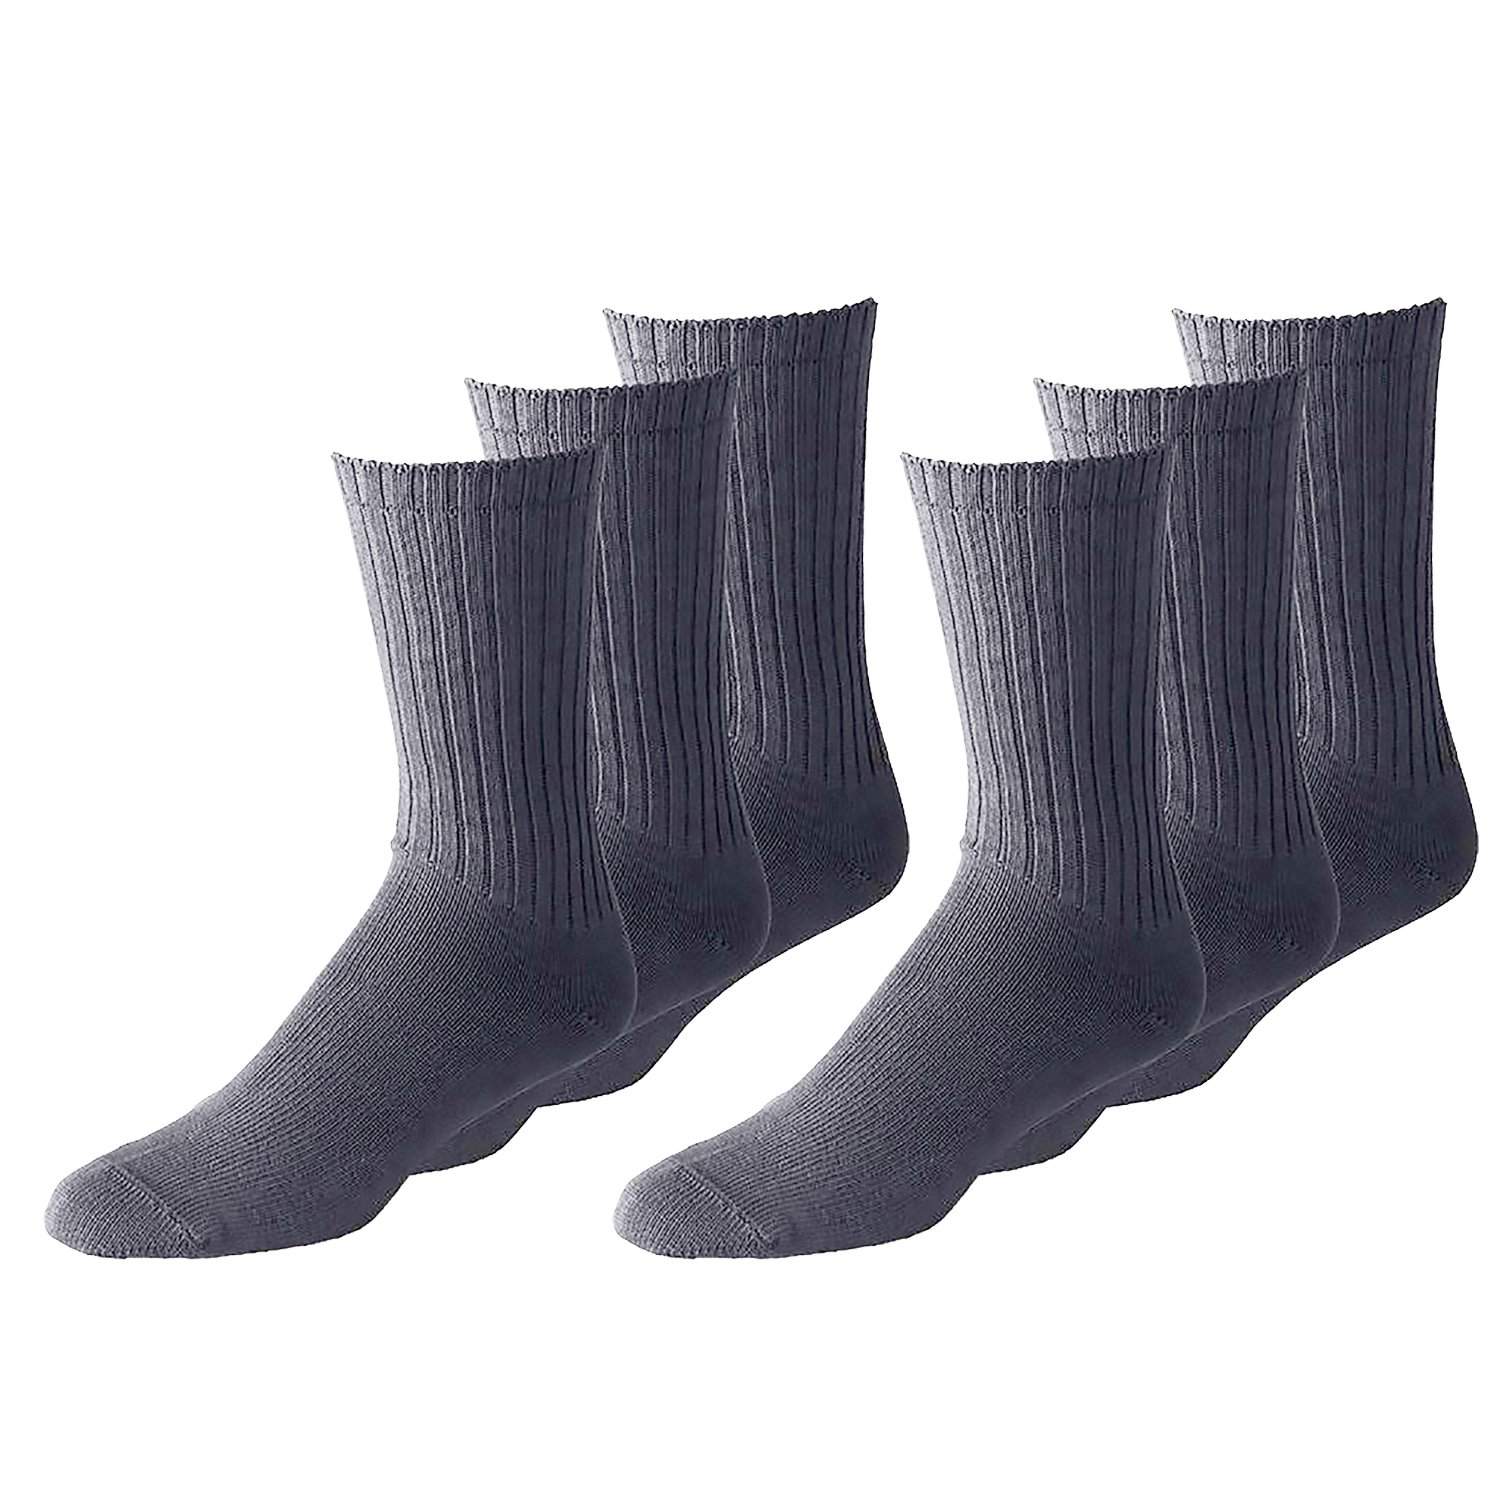 Pack of 144 Daydana Athletic Crew Socks -Wholesale Lot - All Sizes